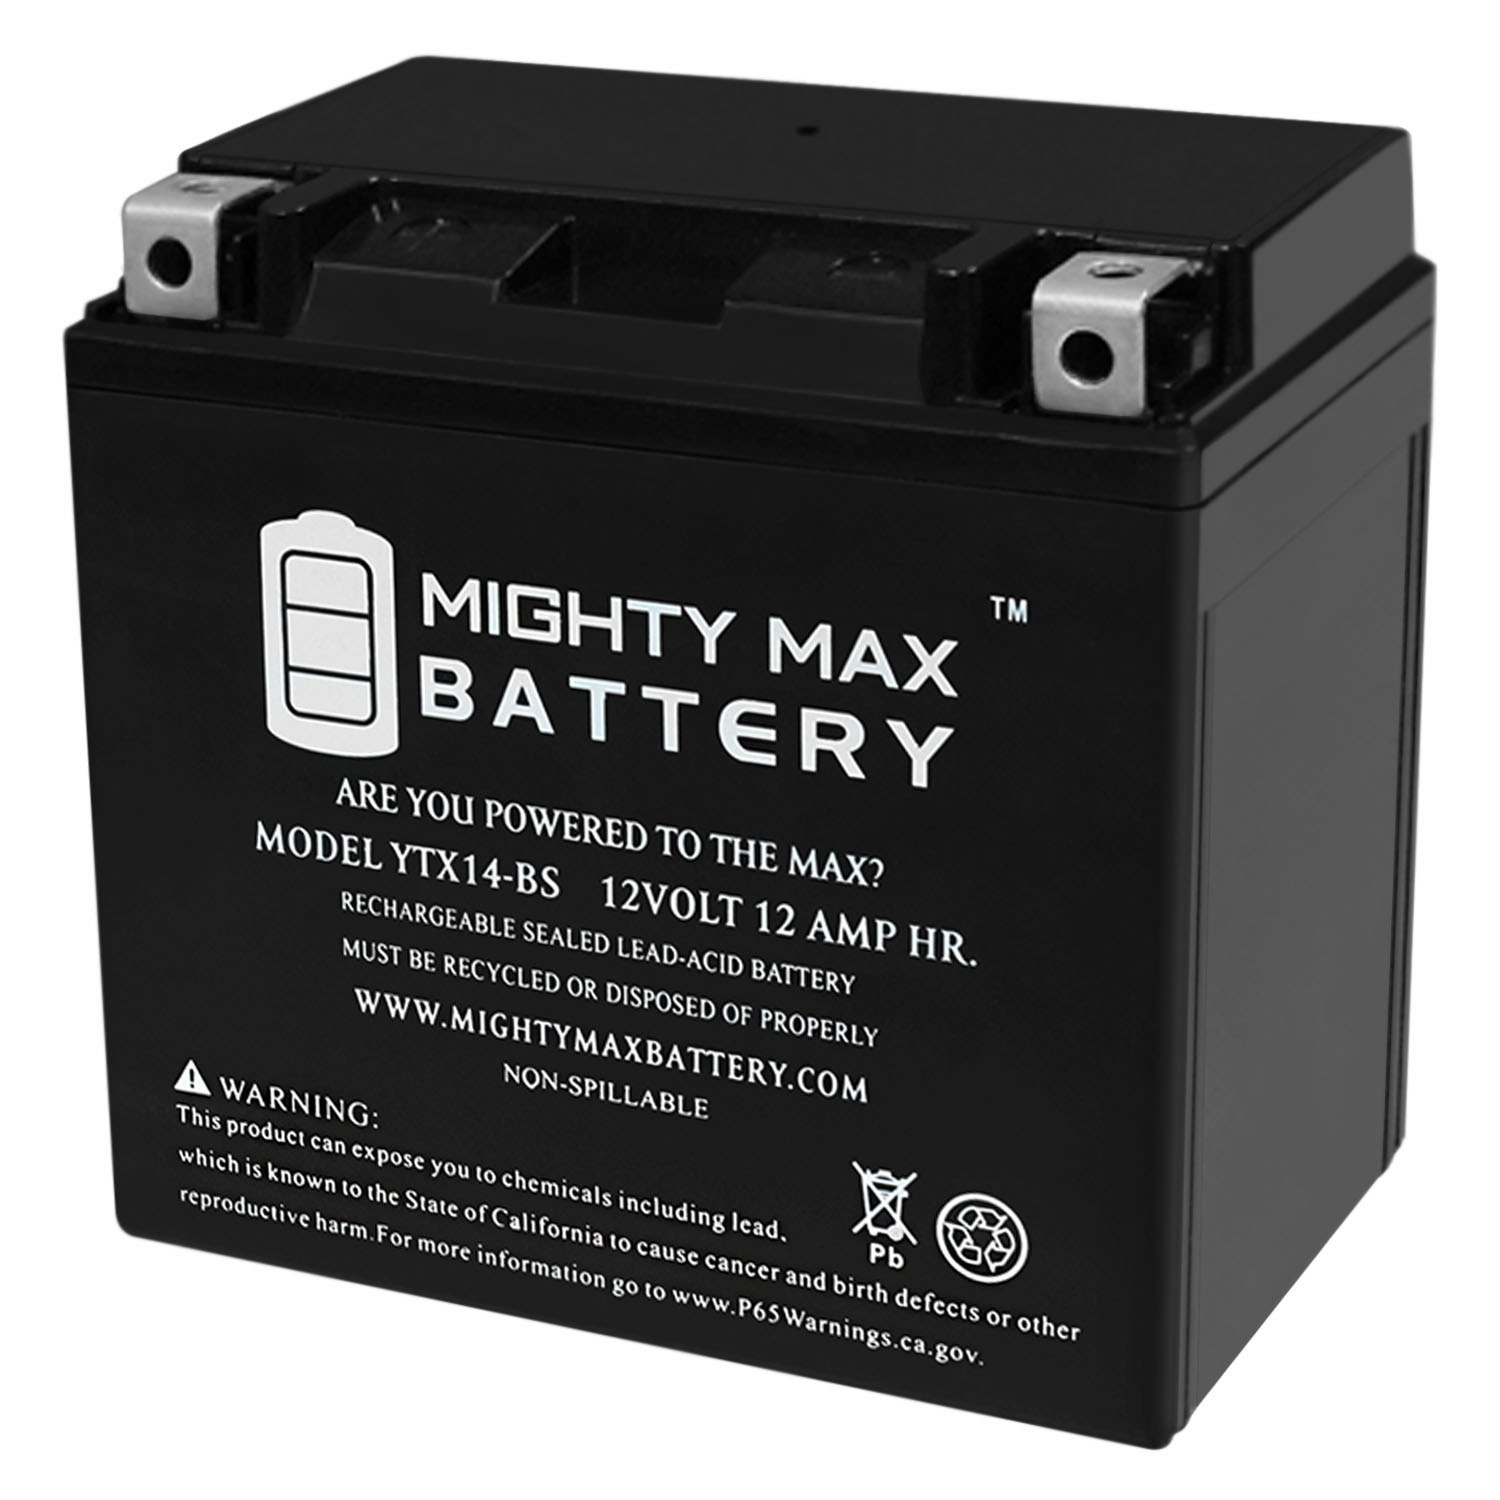 YTX14-BS Battery Replacement for F650GS 07-12 - MightyMaxBattery